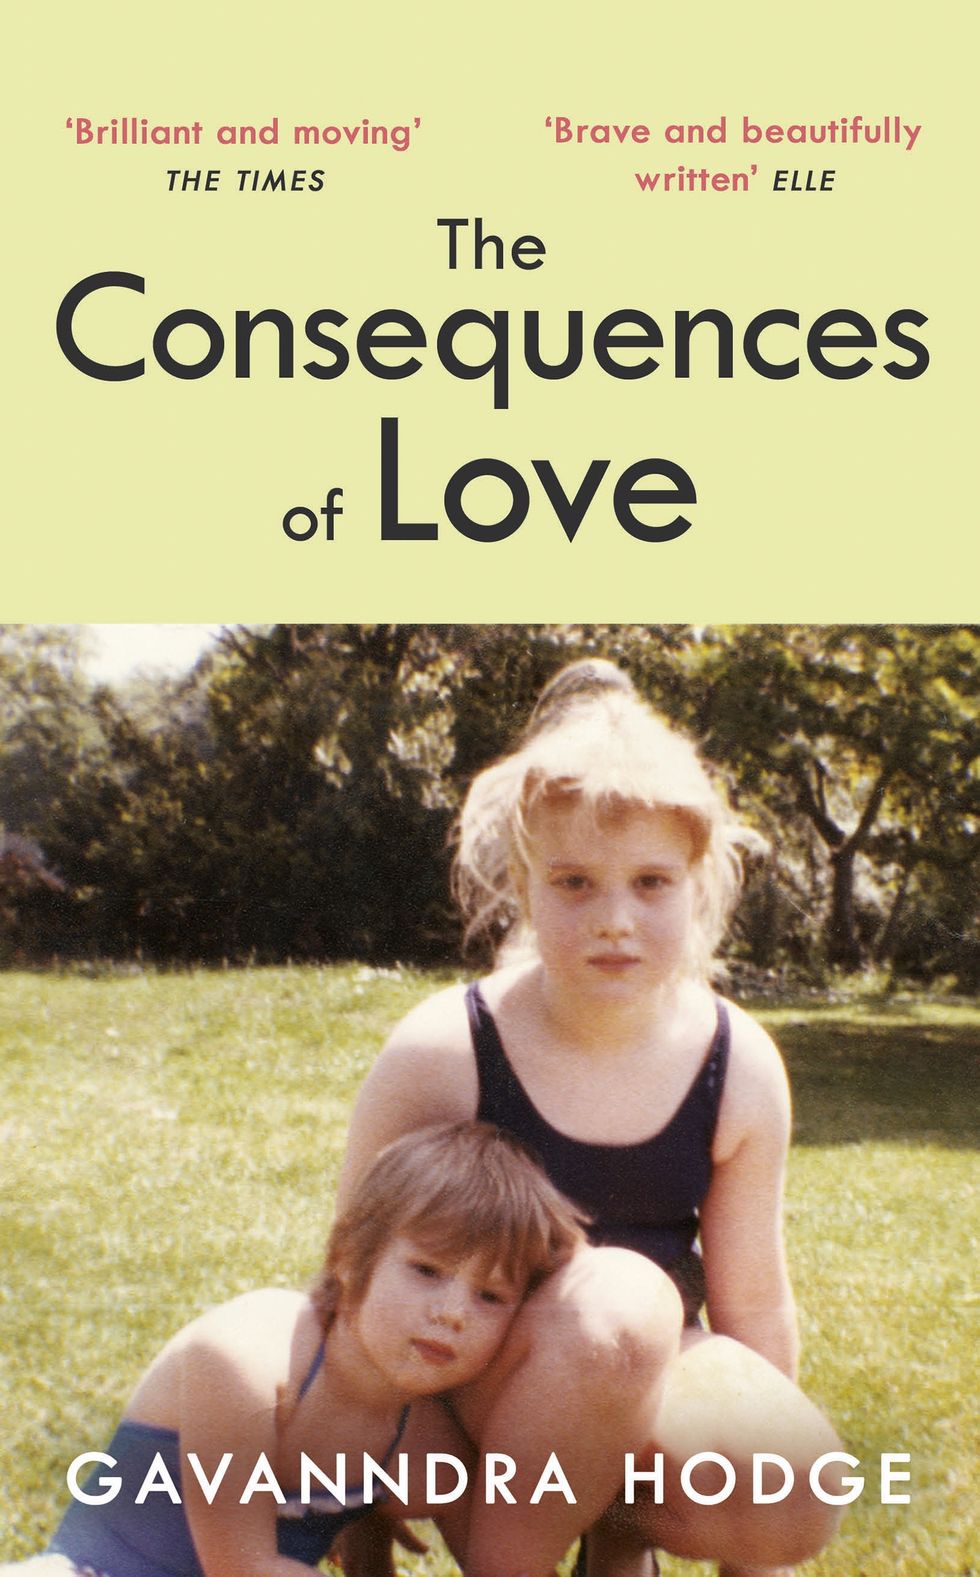 the consequences of love by gavanndra hodge